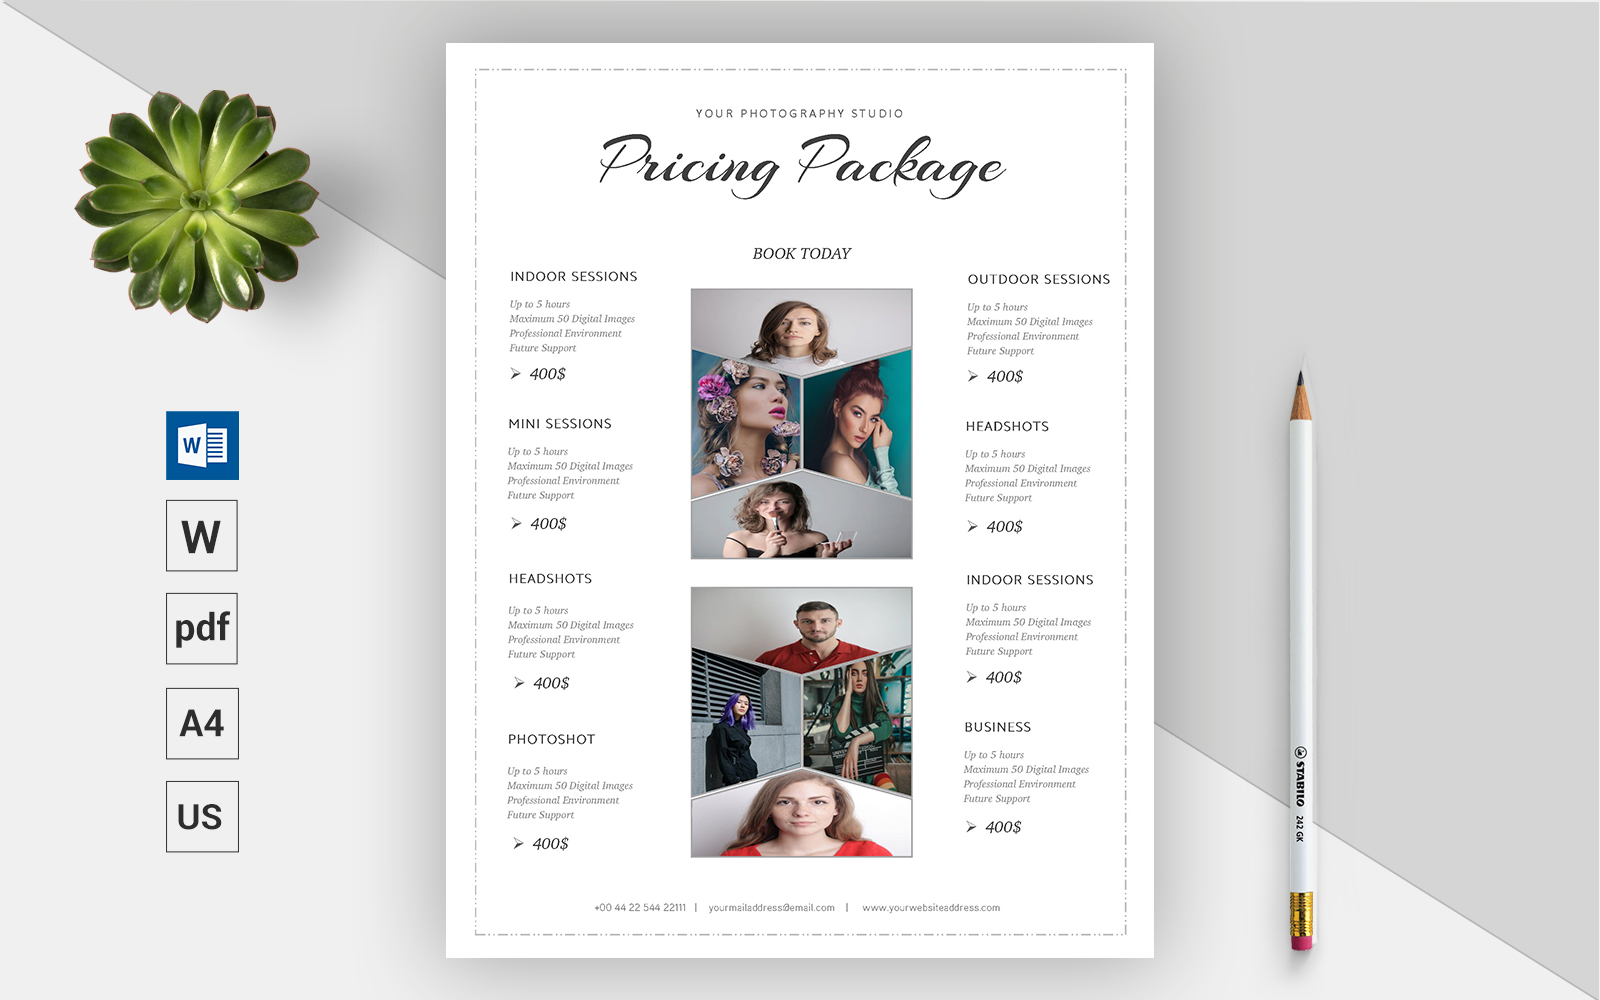 Professional Photography Pricing Guide - Corporate Identity Template